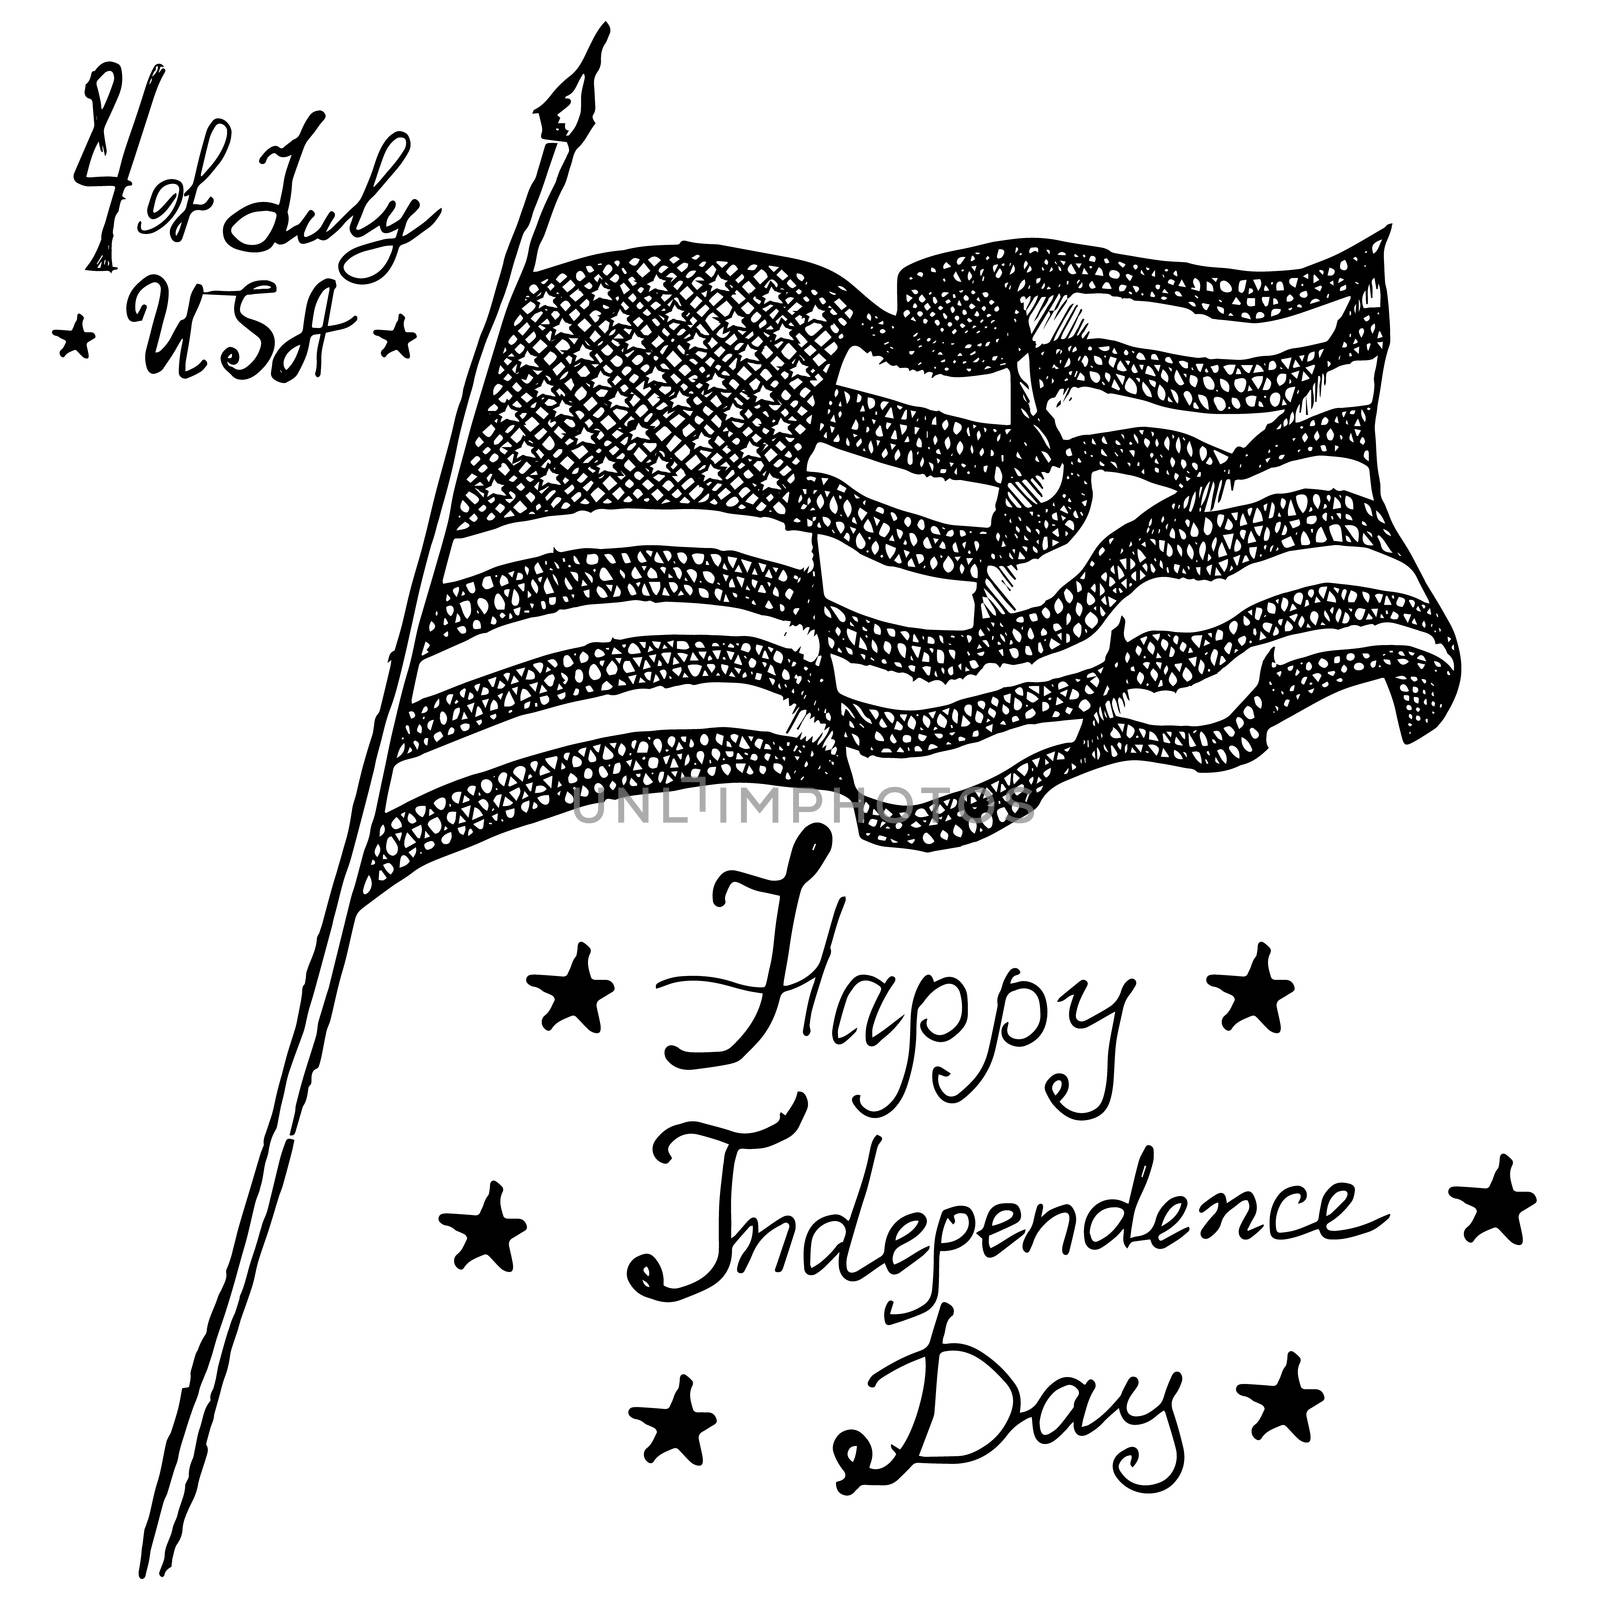 Usa waving flag, American symbol, forth of july, Hand drawn sketch, text happy independence day, vector illustration, isolated on white by Lemon_workshop